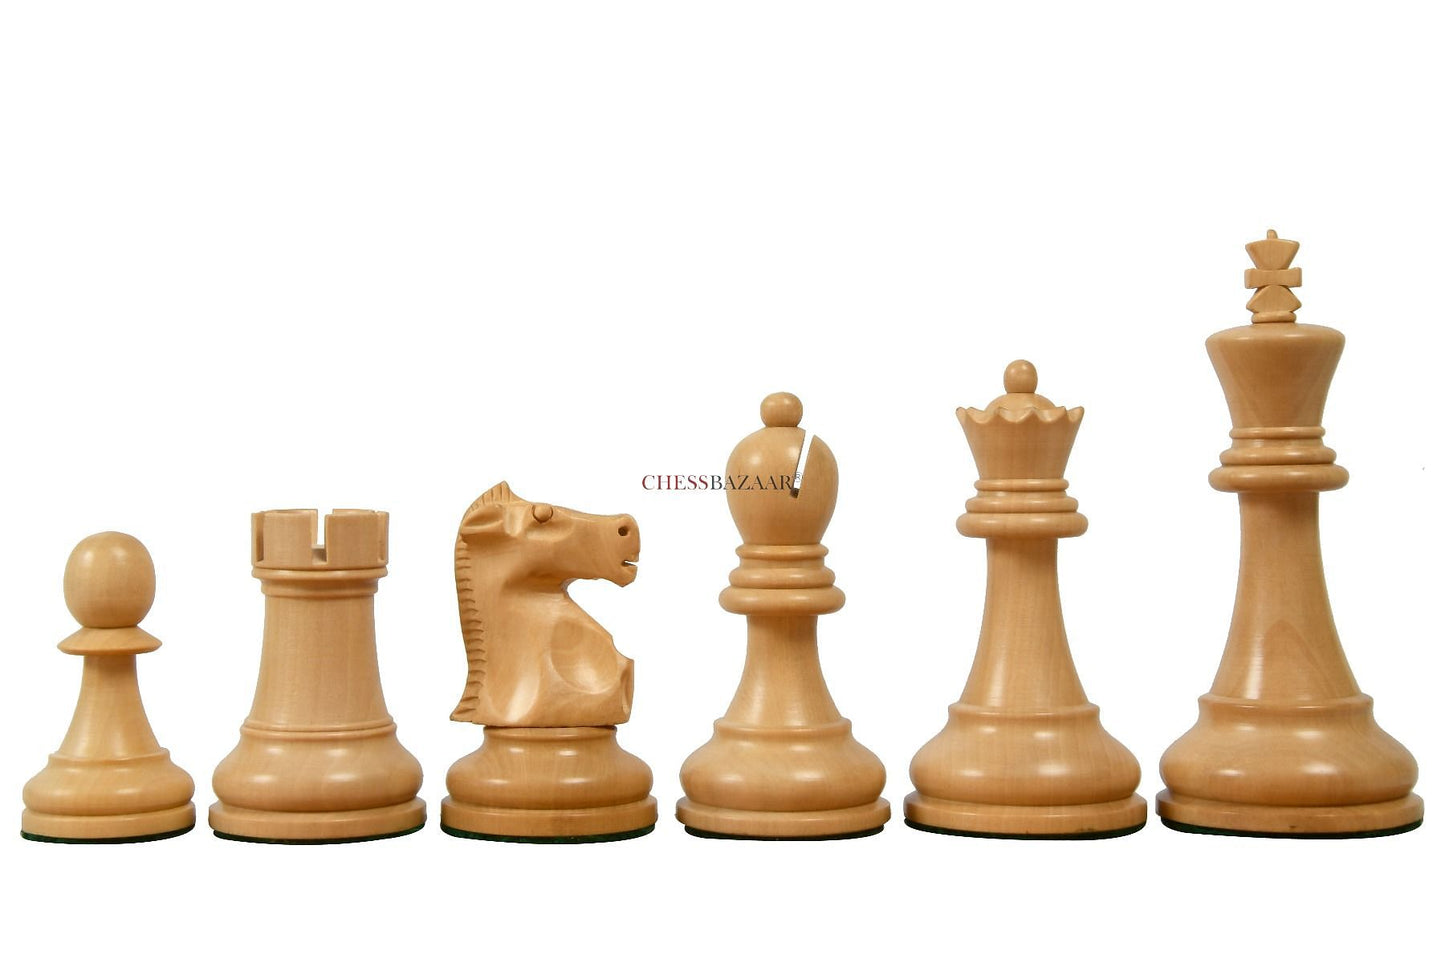 1972 Reproduced Fischer-Spassky Staunton Pattern Chess Pieces V2.0 in Ebonized Boxwood & Natural Boxwood - 3.7" King